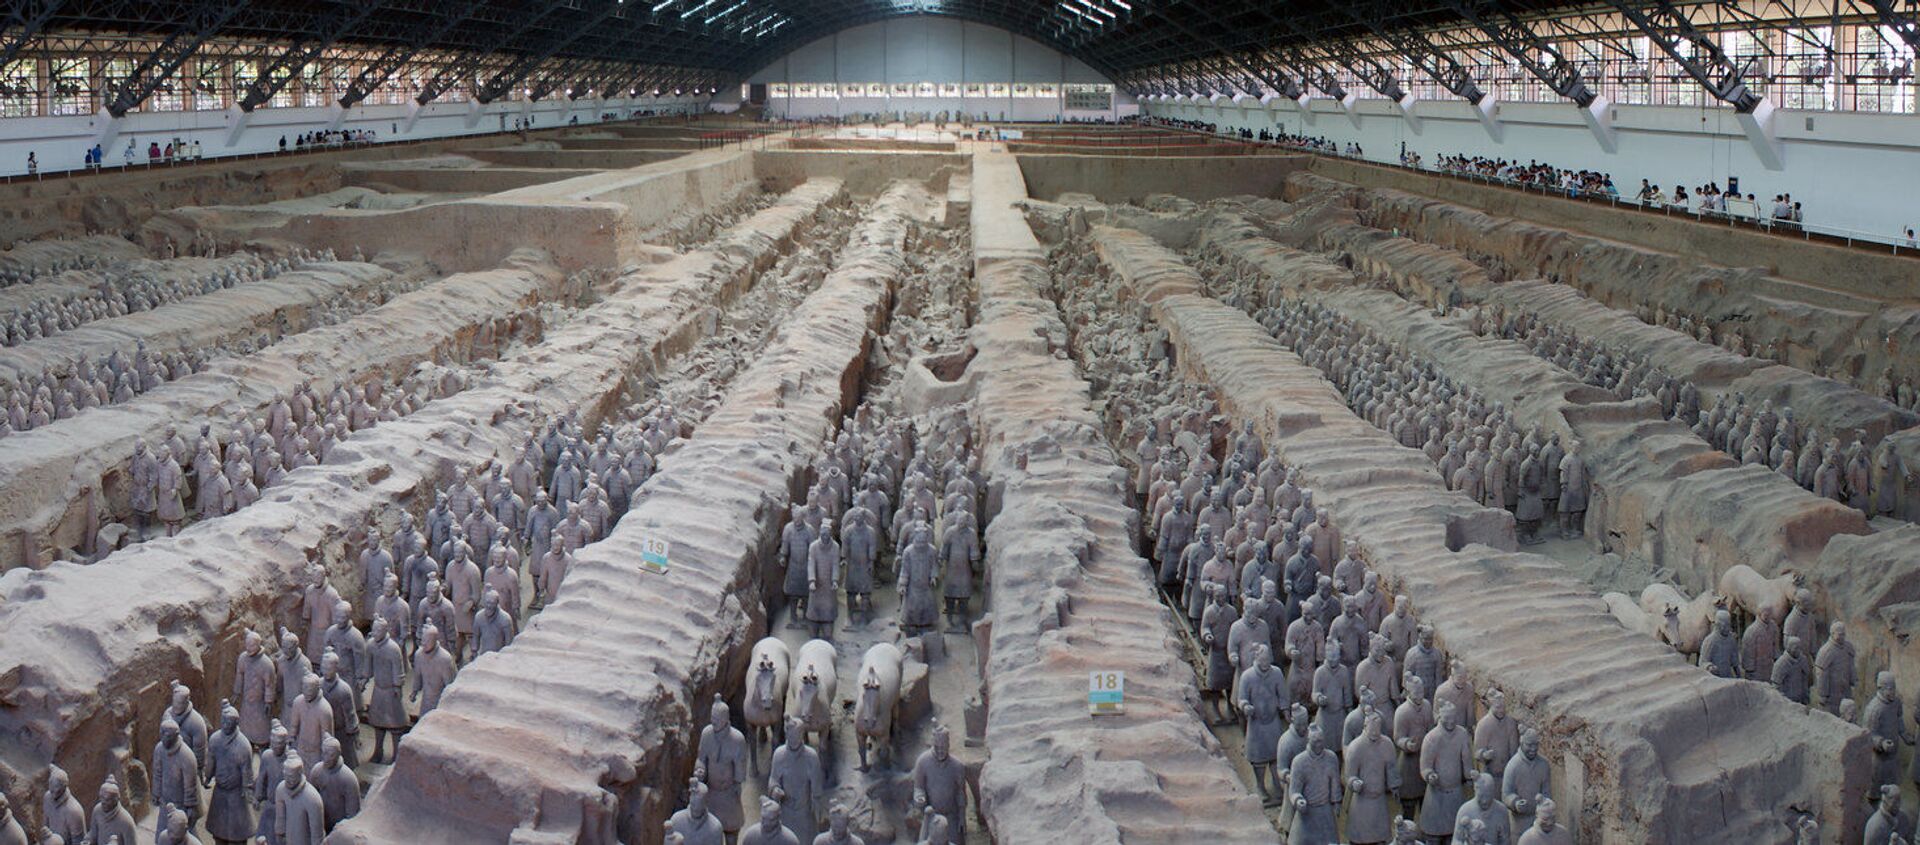 The Terracotta Army expands as 220 more earthenware 'warriors' are uncovered in the necropolis of the Chinese emperor Qin Shi Huang. - Sputnik International, 1920, 02.01.2020